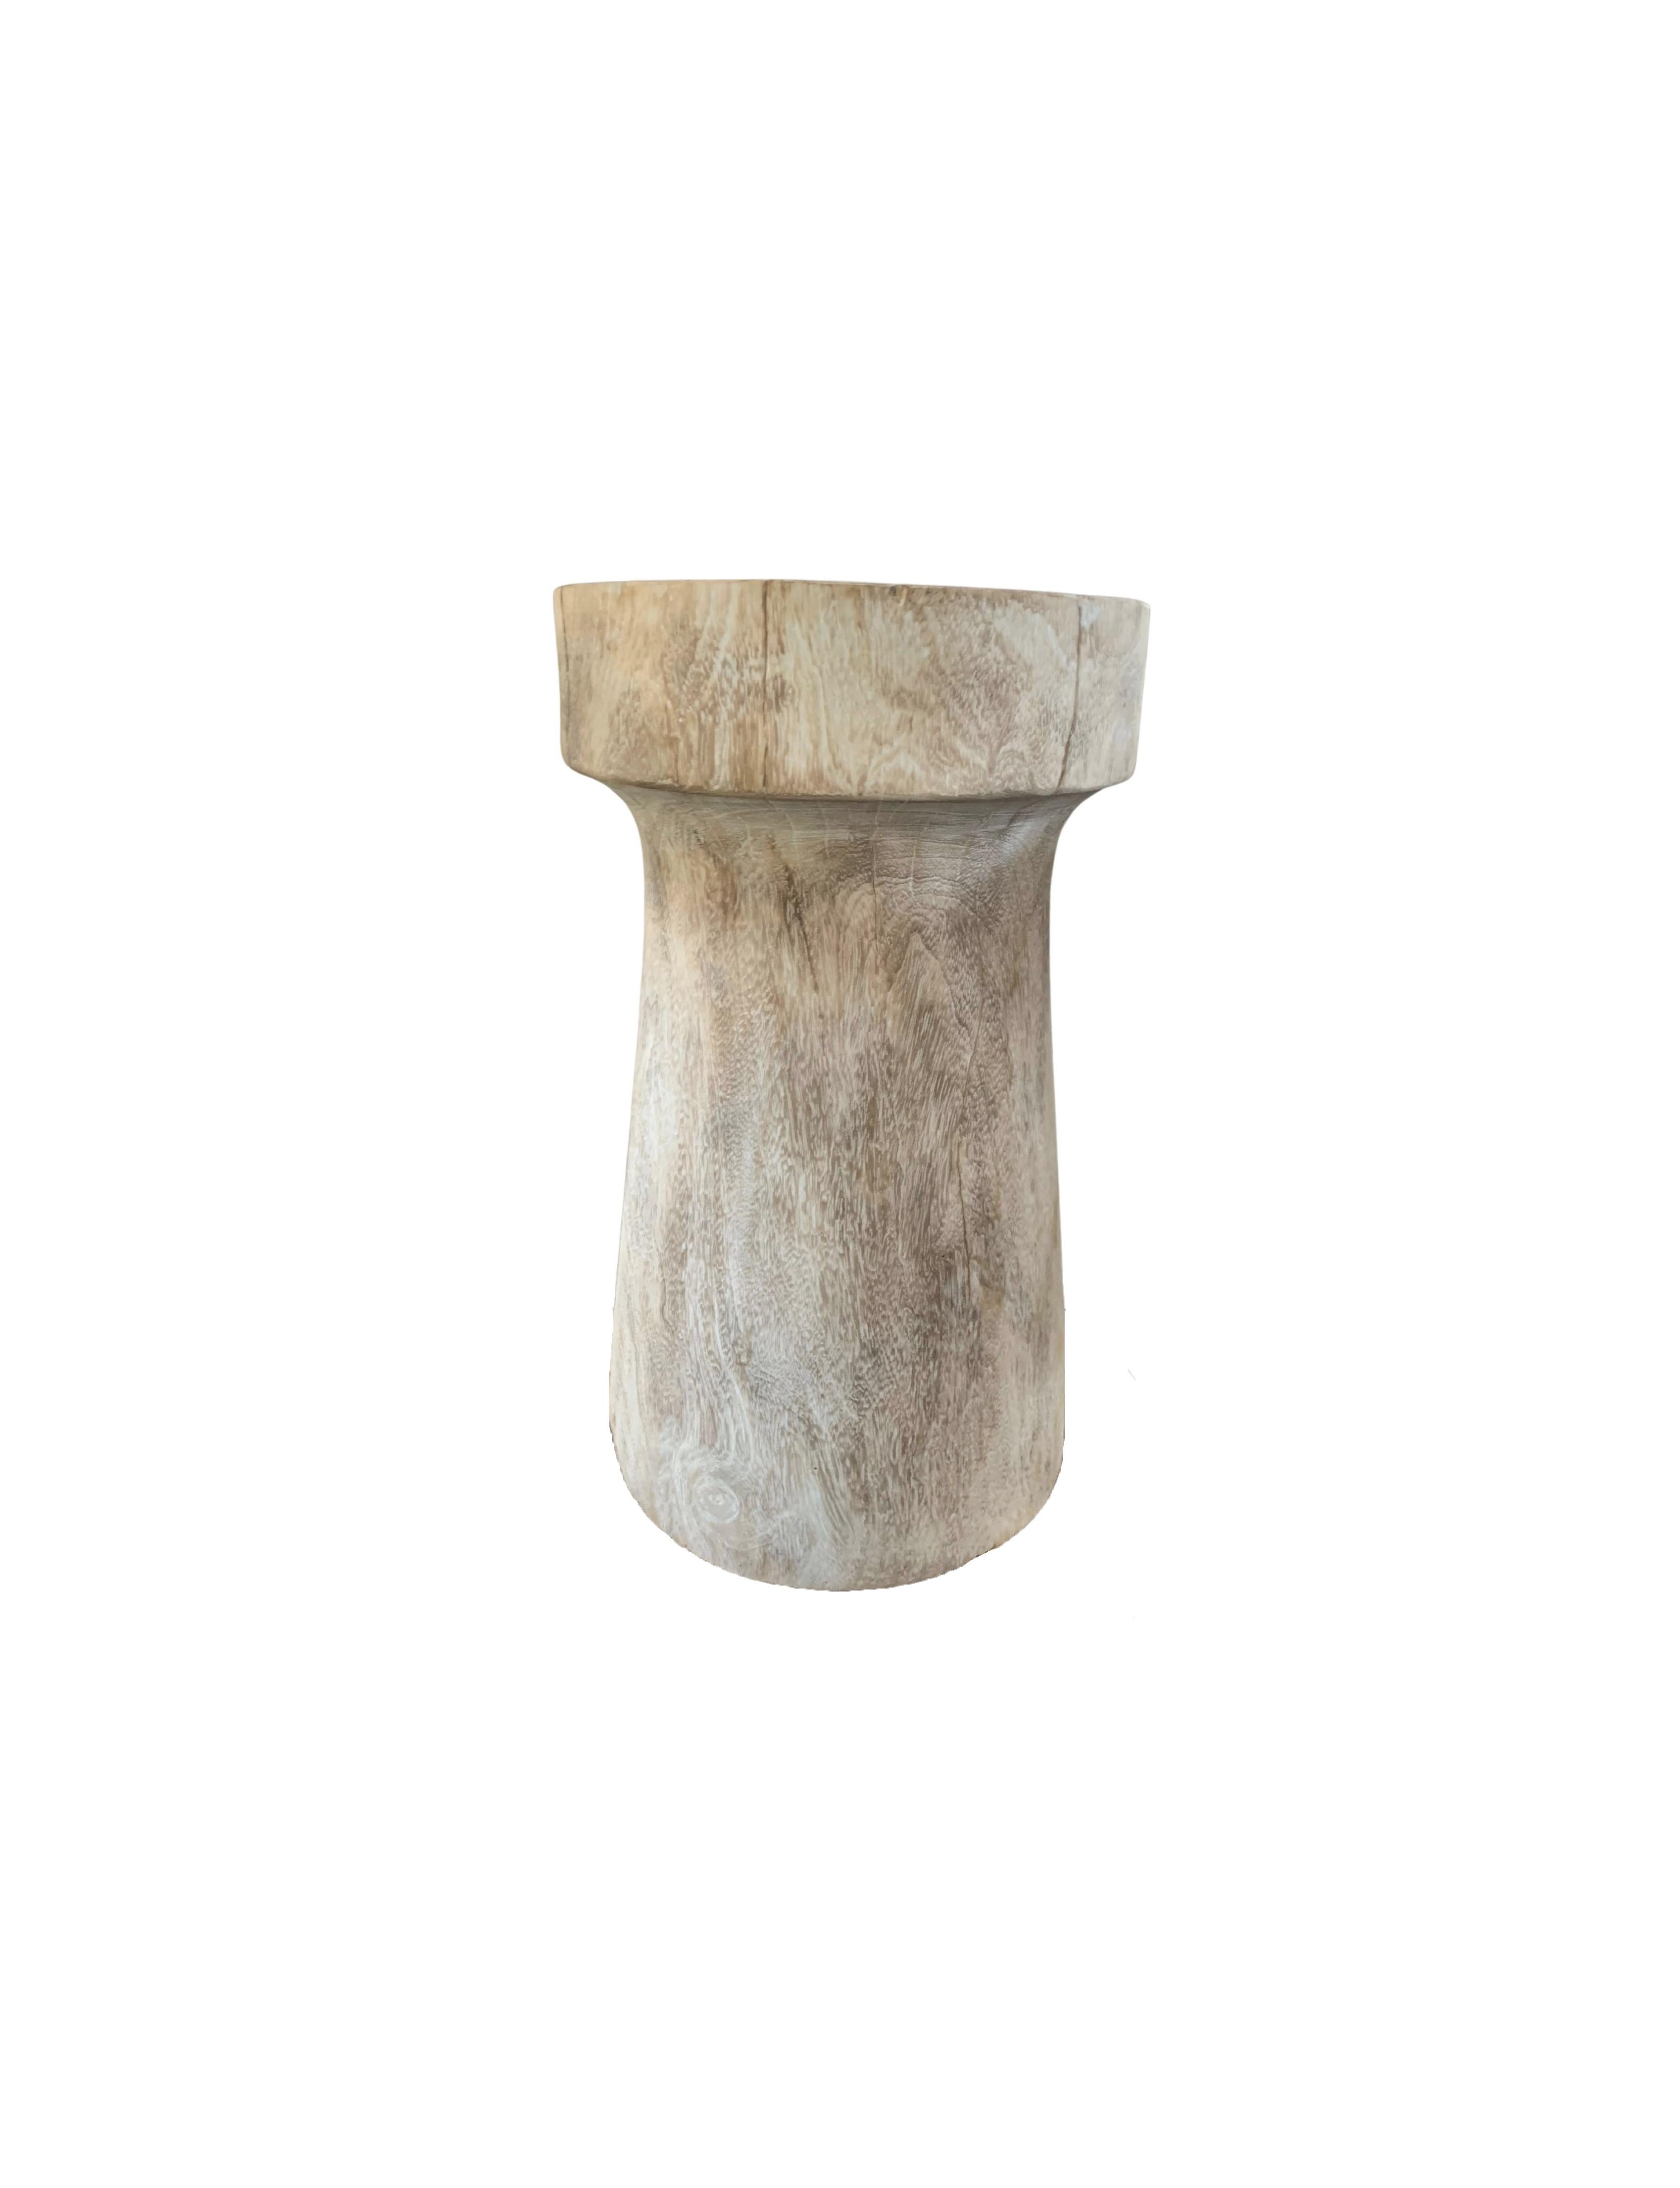 Indonesian Sculptural Side Table Crafted from Mango Wood, Bleached Finish For Sale